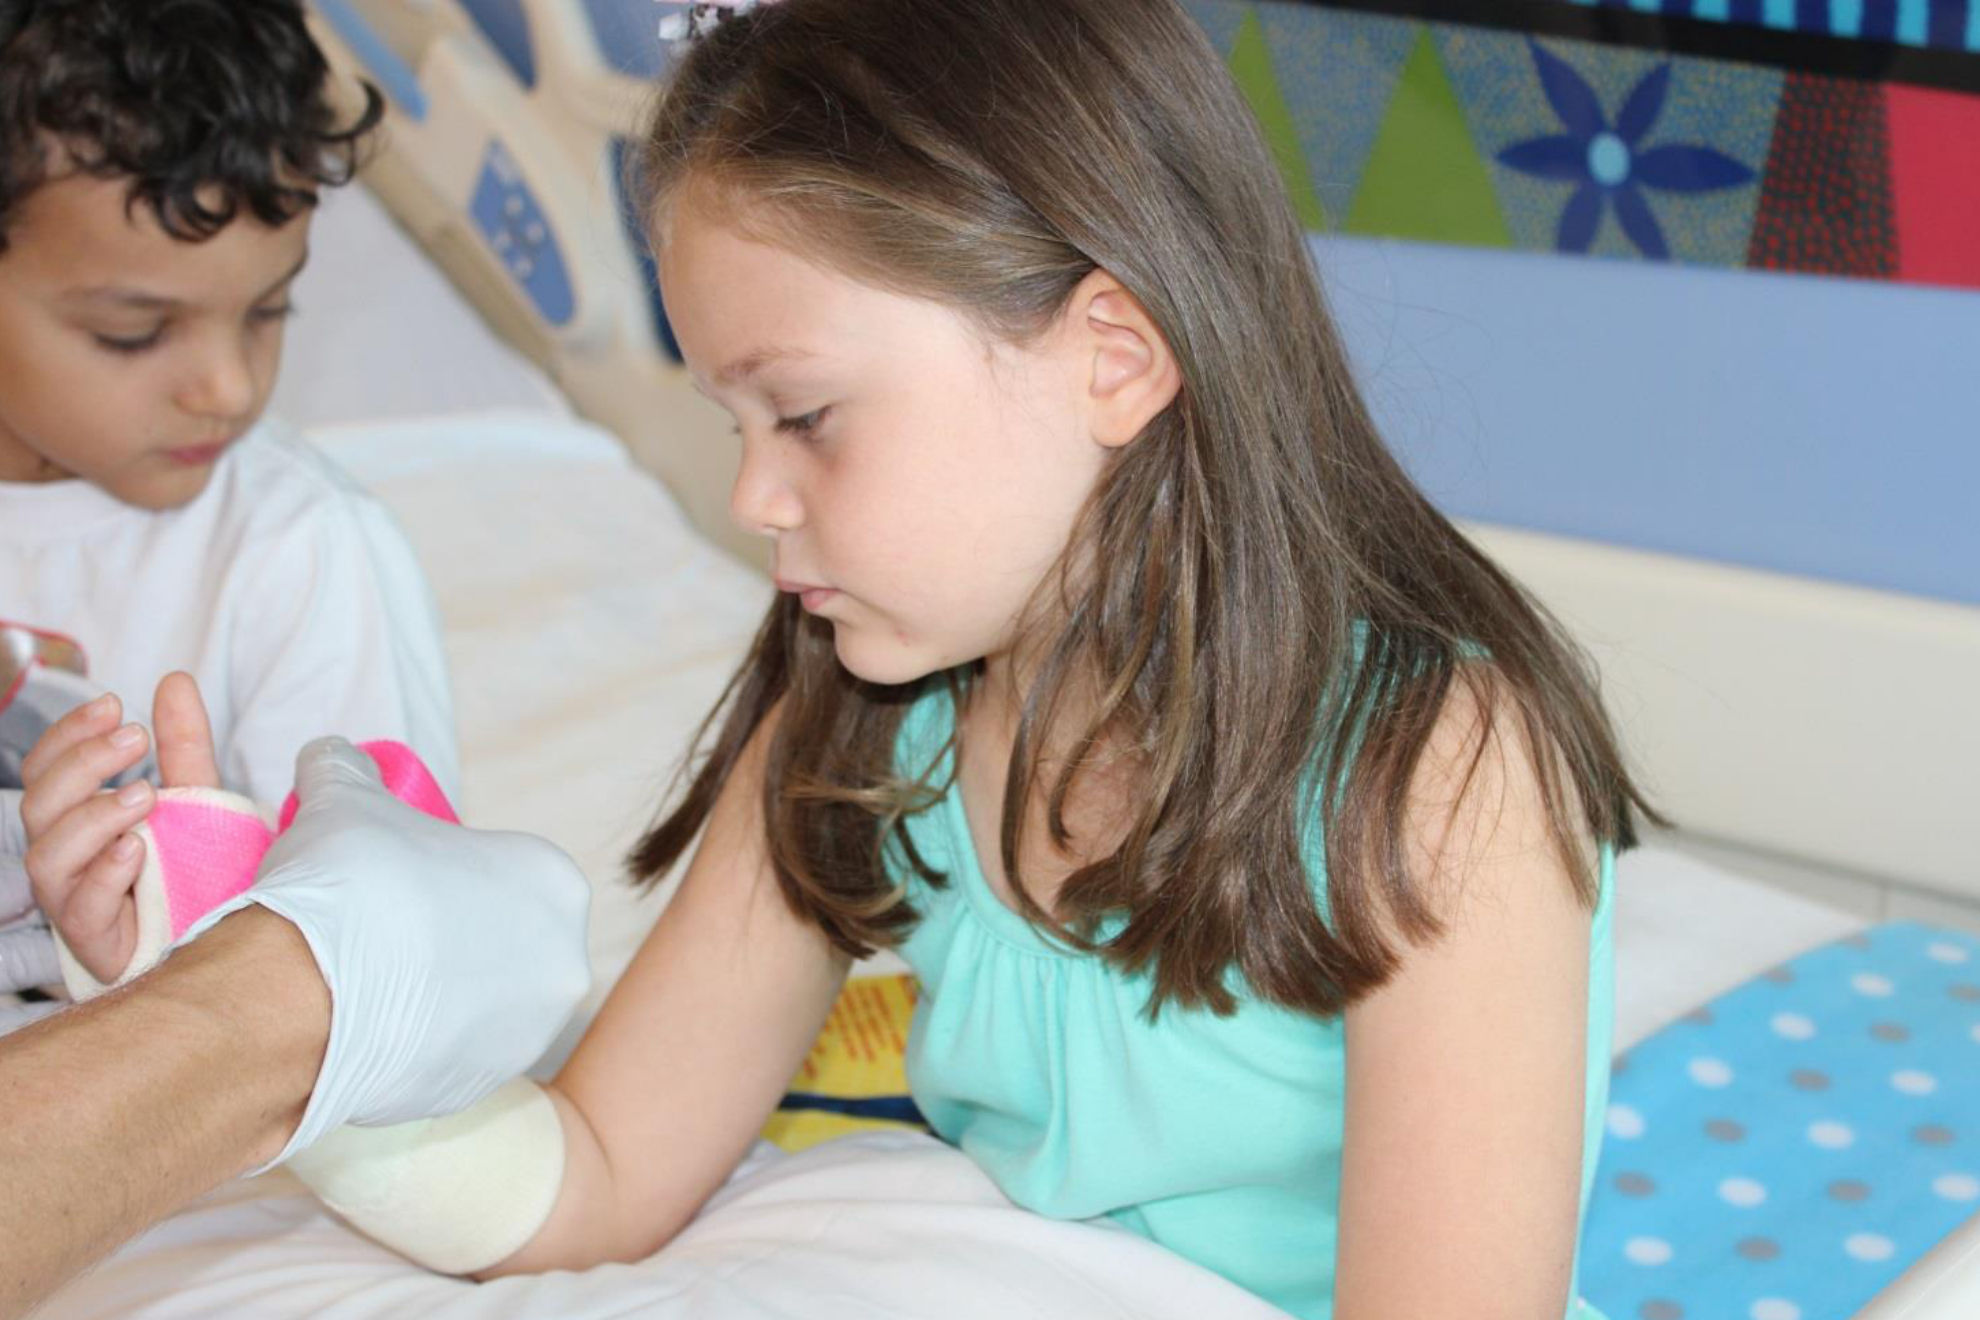 My Hospital Story: A girl's visit to get a cast